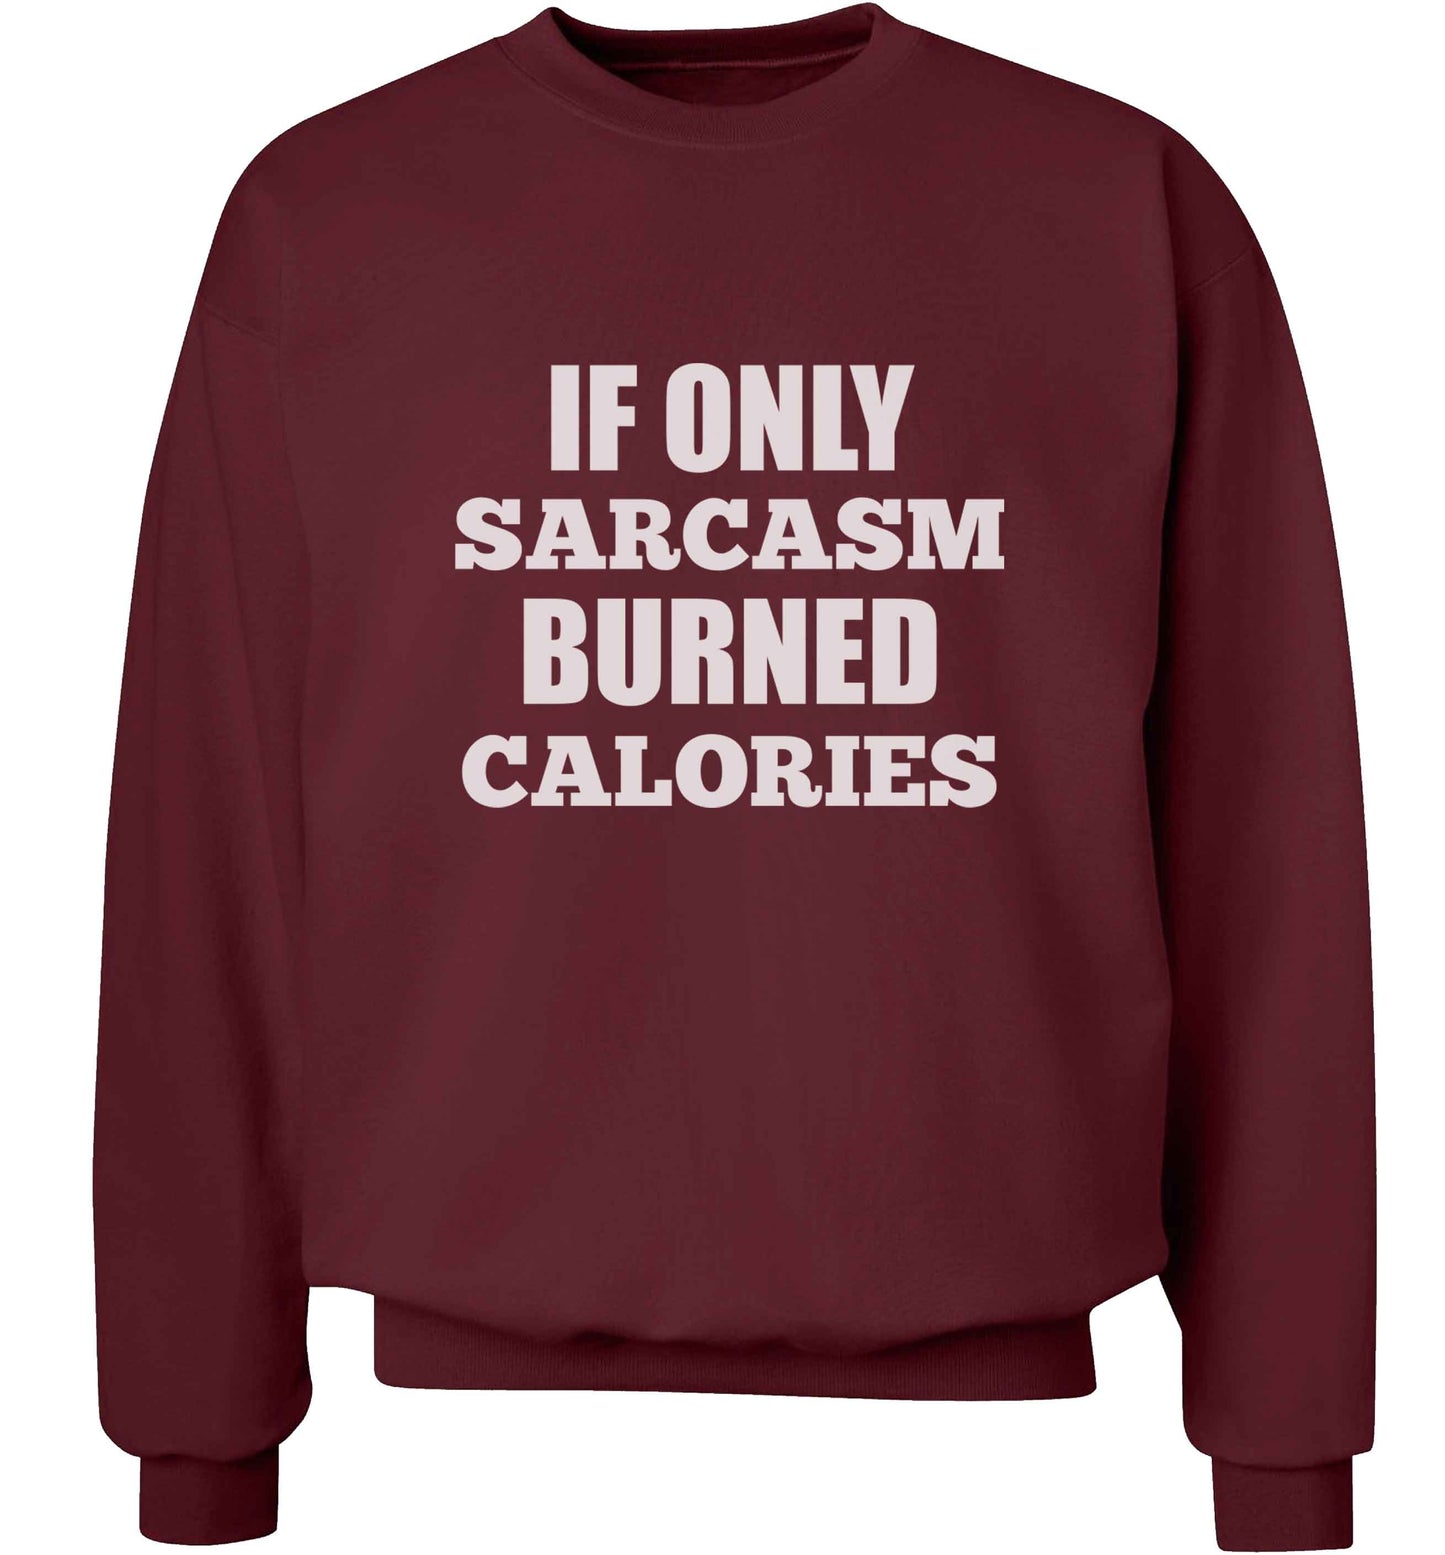 If only sarcasm burned calories adult's unisex maroon sweater 2XL